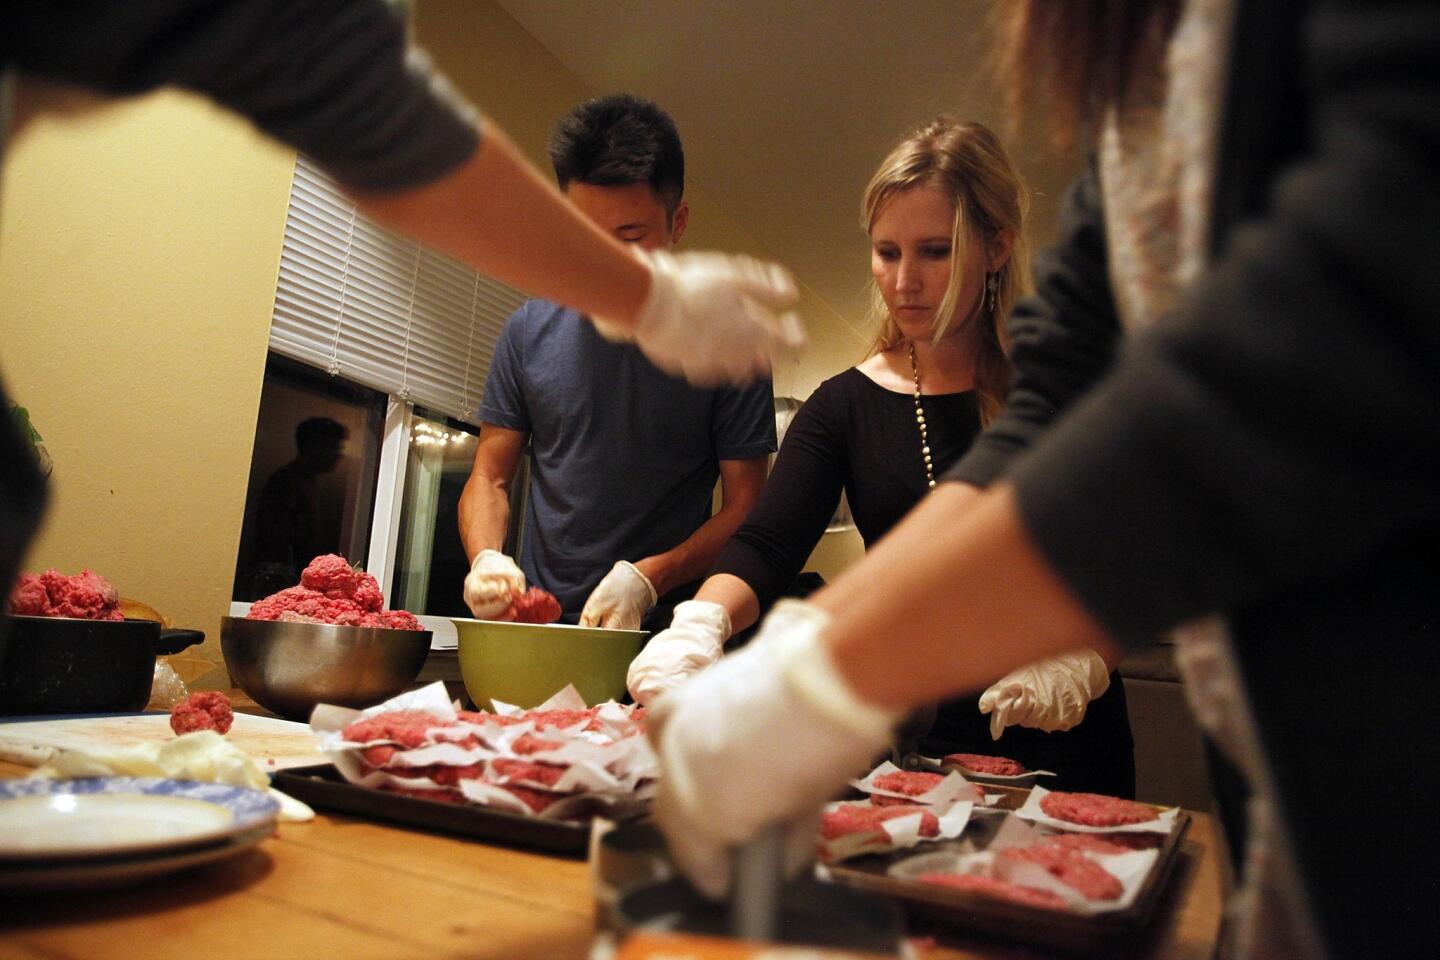 Students from UC Santa Barbara in Isla Vista make hamburgers in a leased building known as the Jesus Burgers house. After service, the grill is fired up.